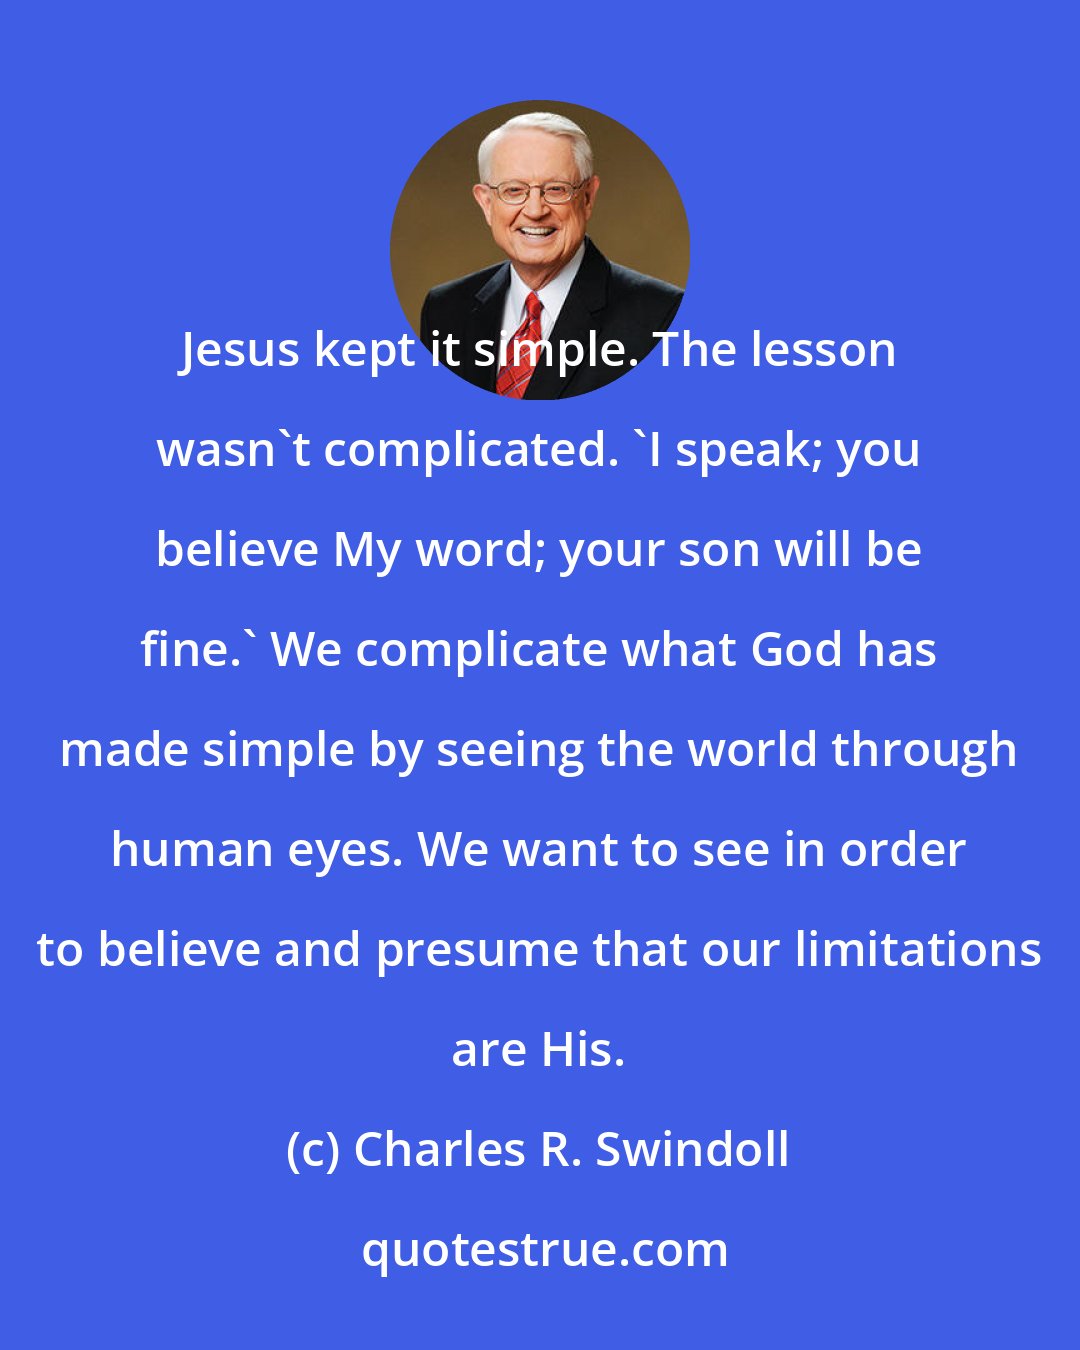 Charles R. Swindoll: Jesus kept it simple. The lesson wasn't complicated. 'I speak; you believe My word; your son will be fine.' We complicate what God has made simple by seeing the world through human eyes. We want to see in order to believe and presume that our limitations are His.